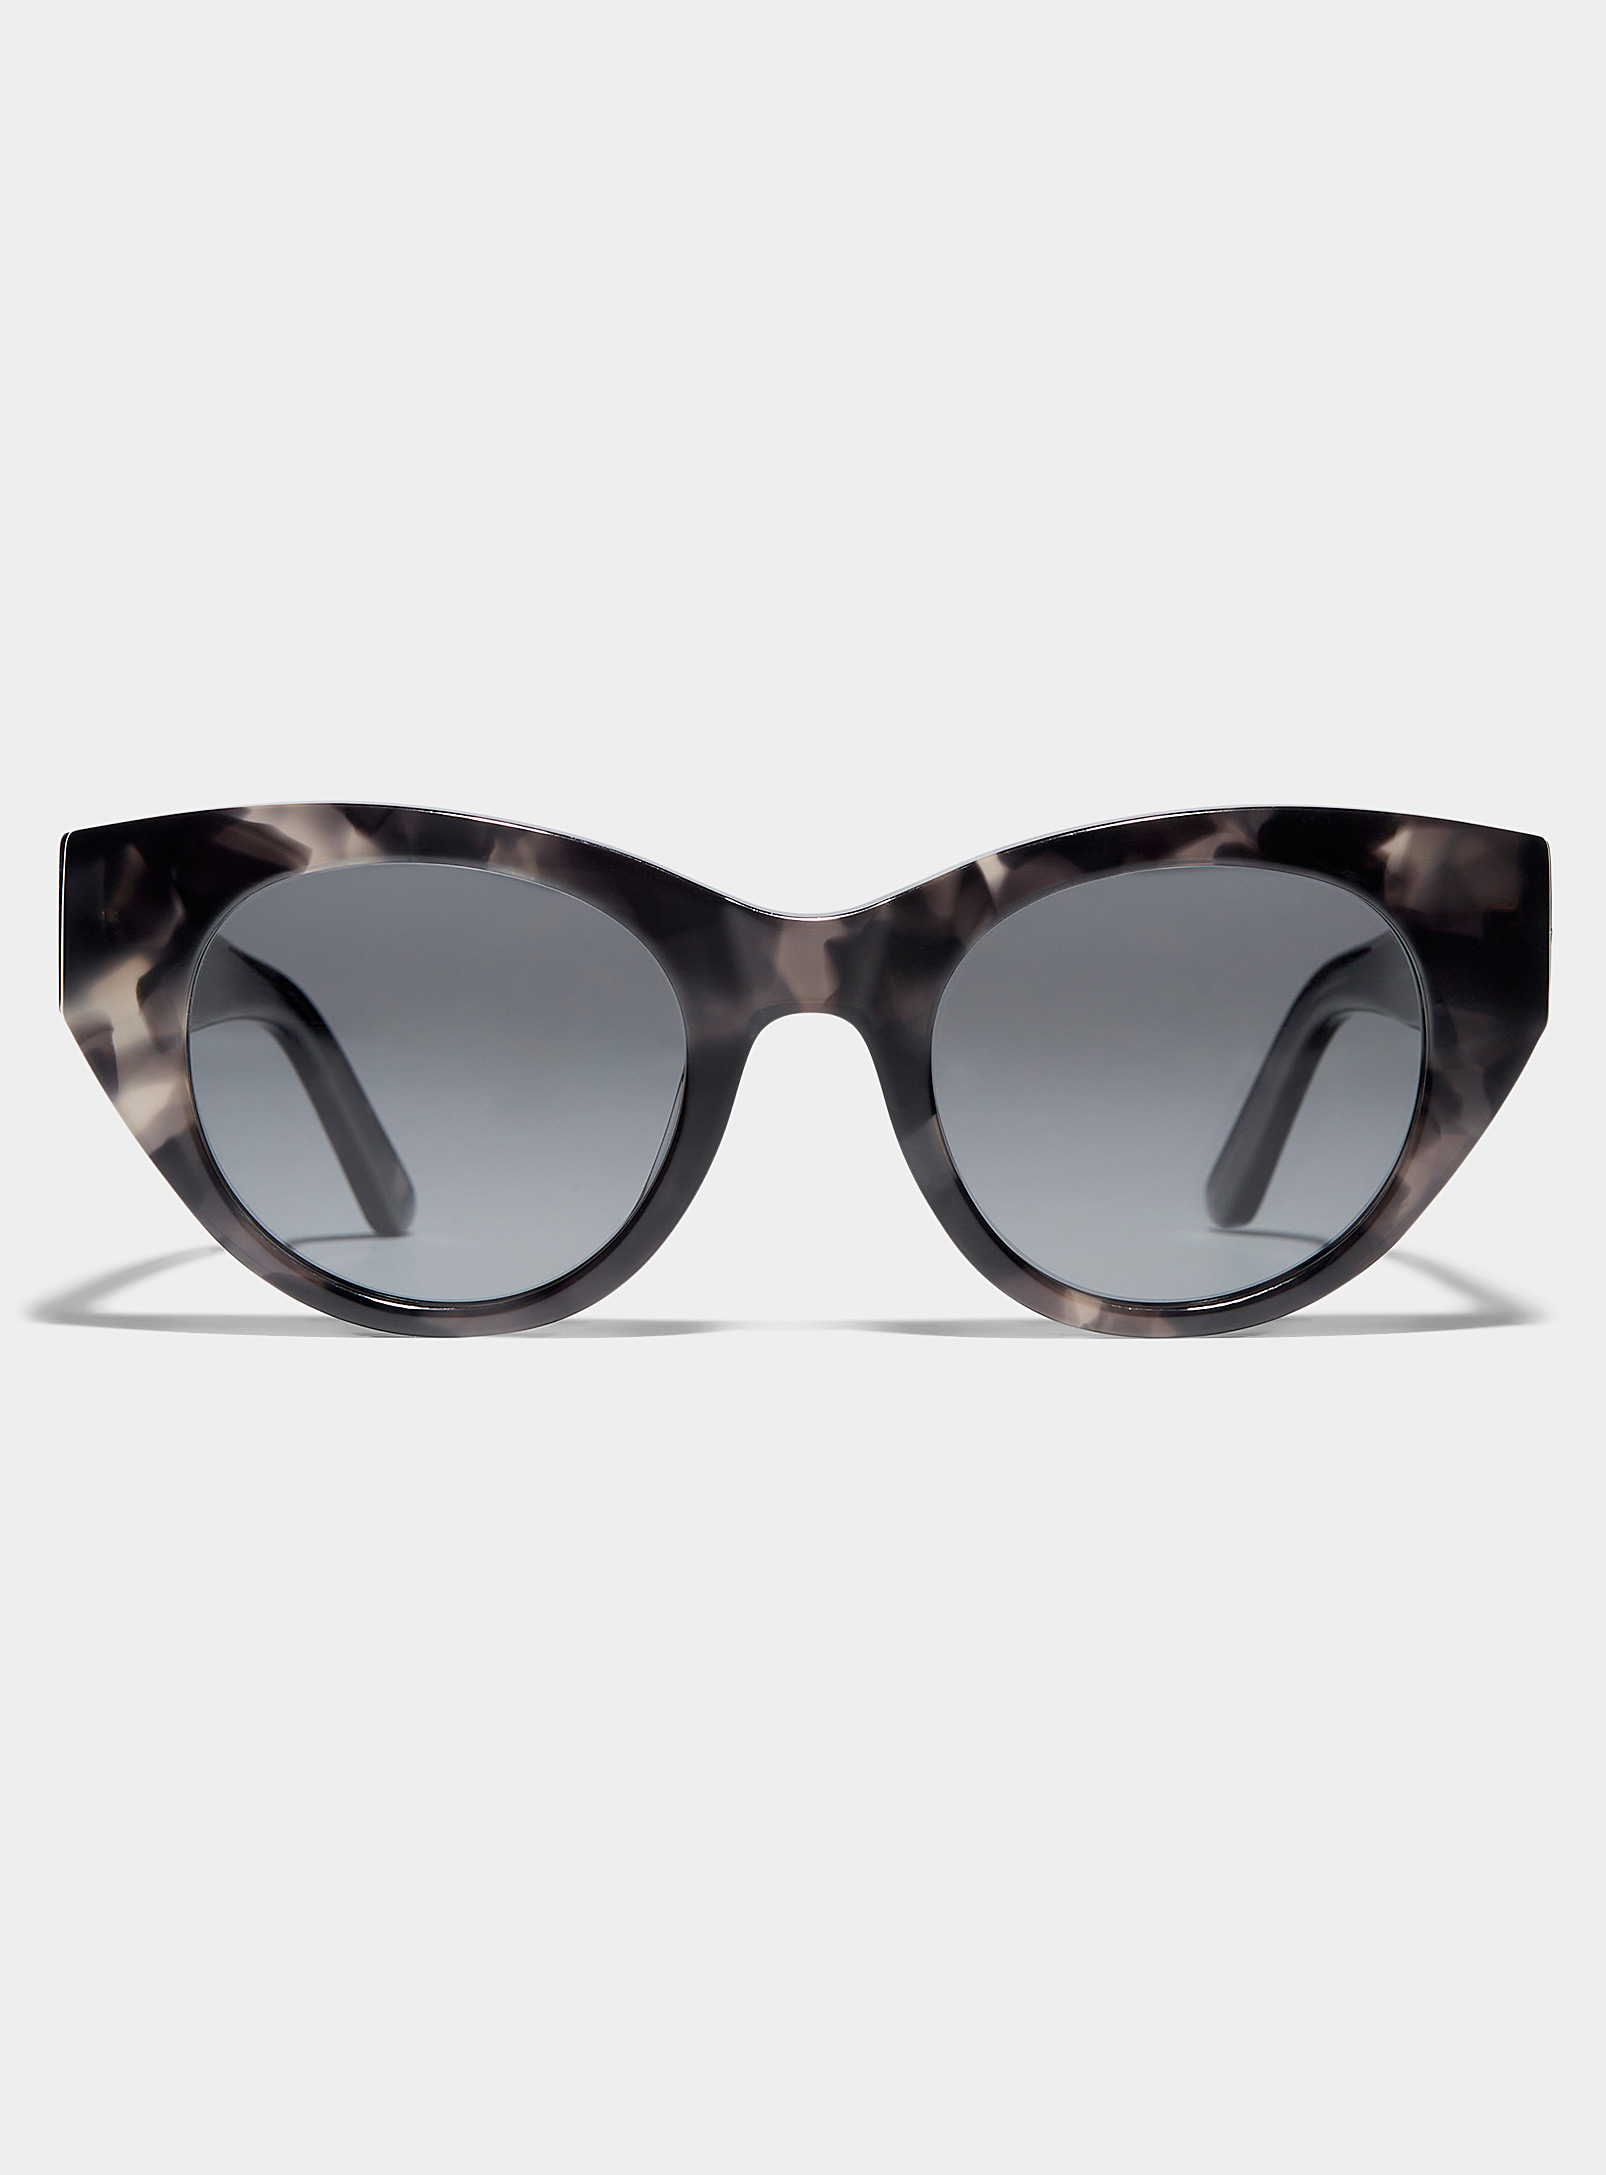 French Kiwis Jackie Rounded Cat-eye Sunglasses In Gray